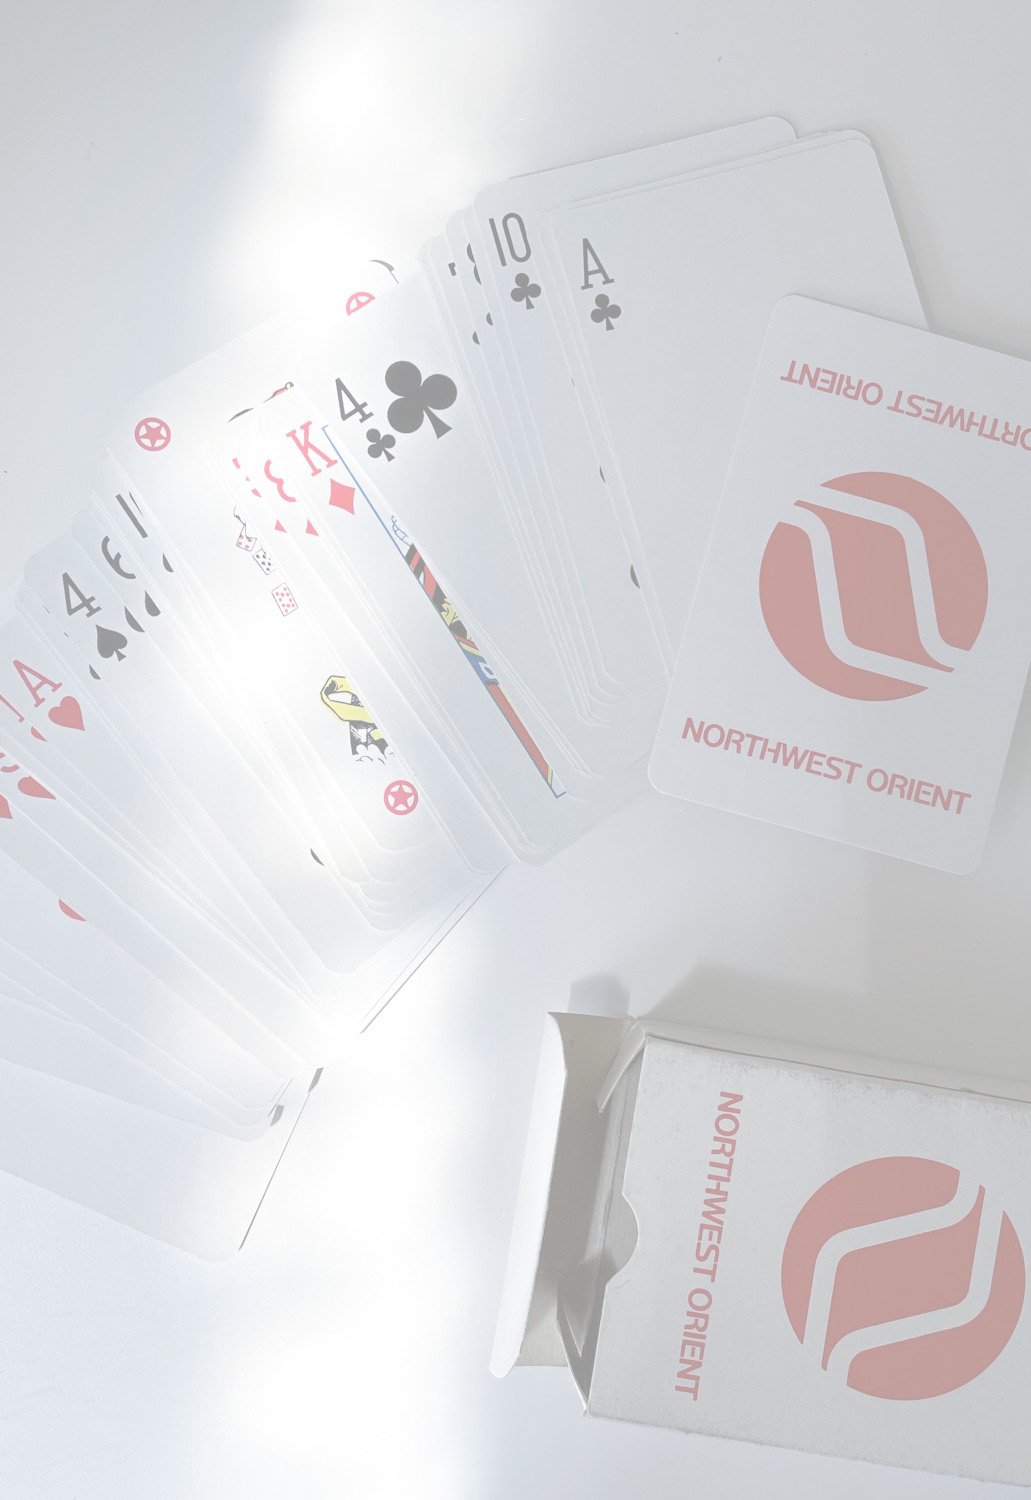 PLAYING CARDS of Airlines -NORTHWEST ORIENT